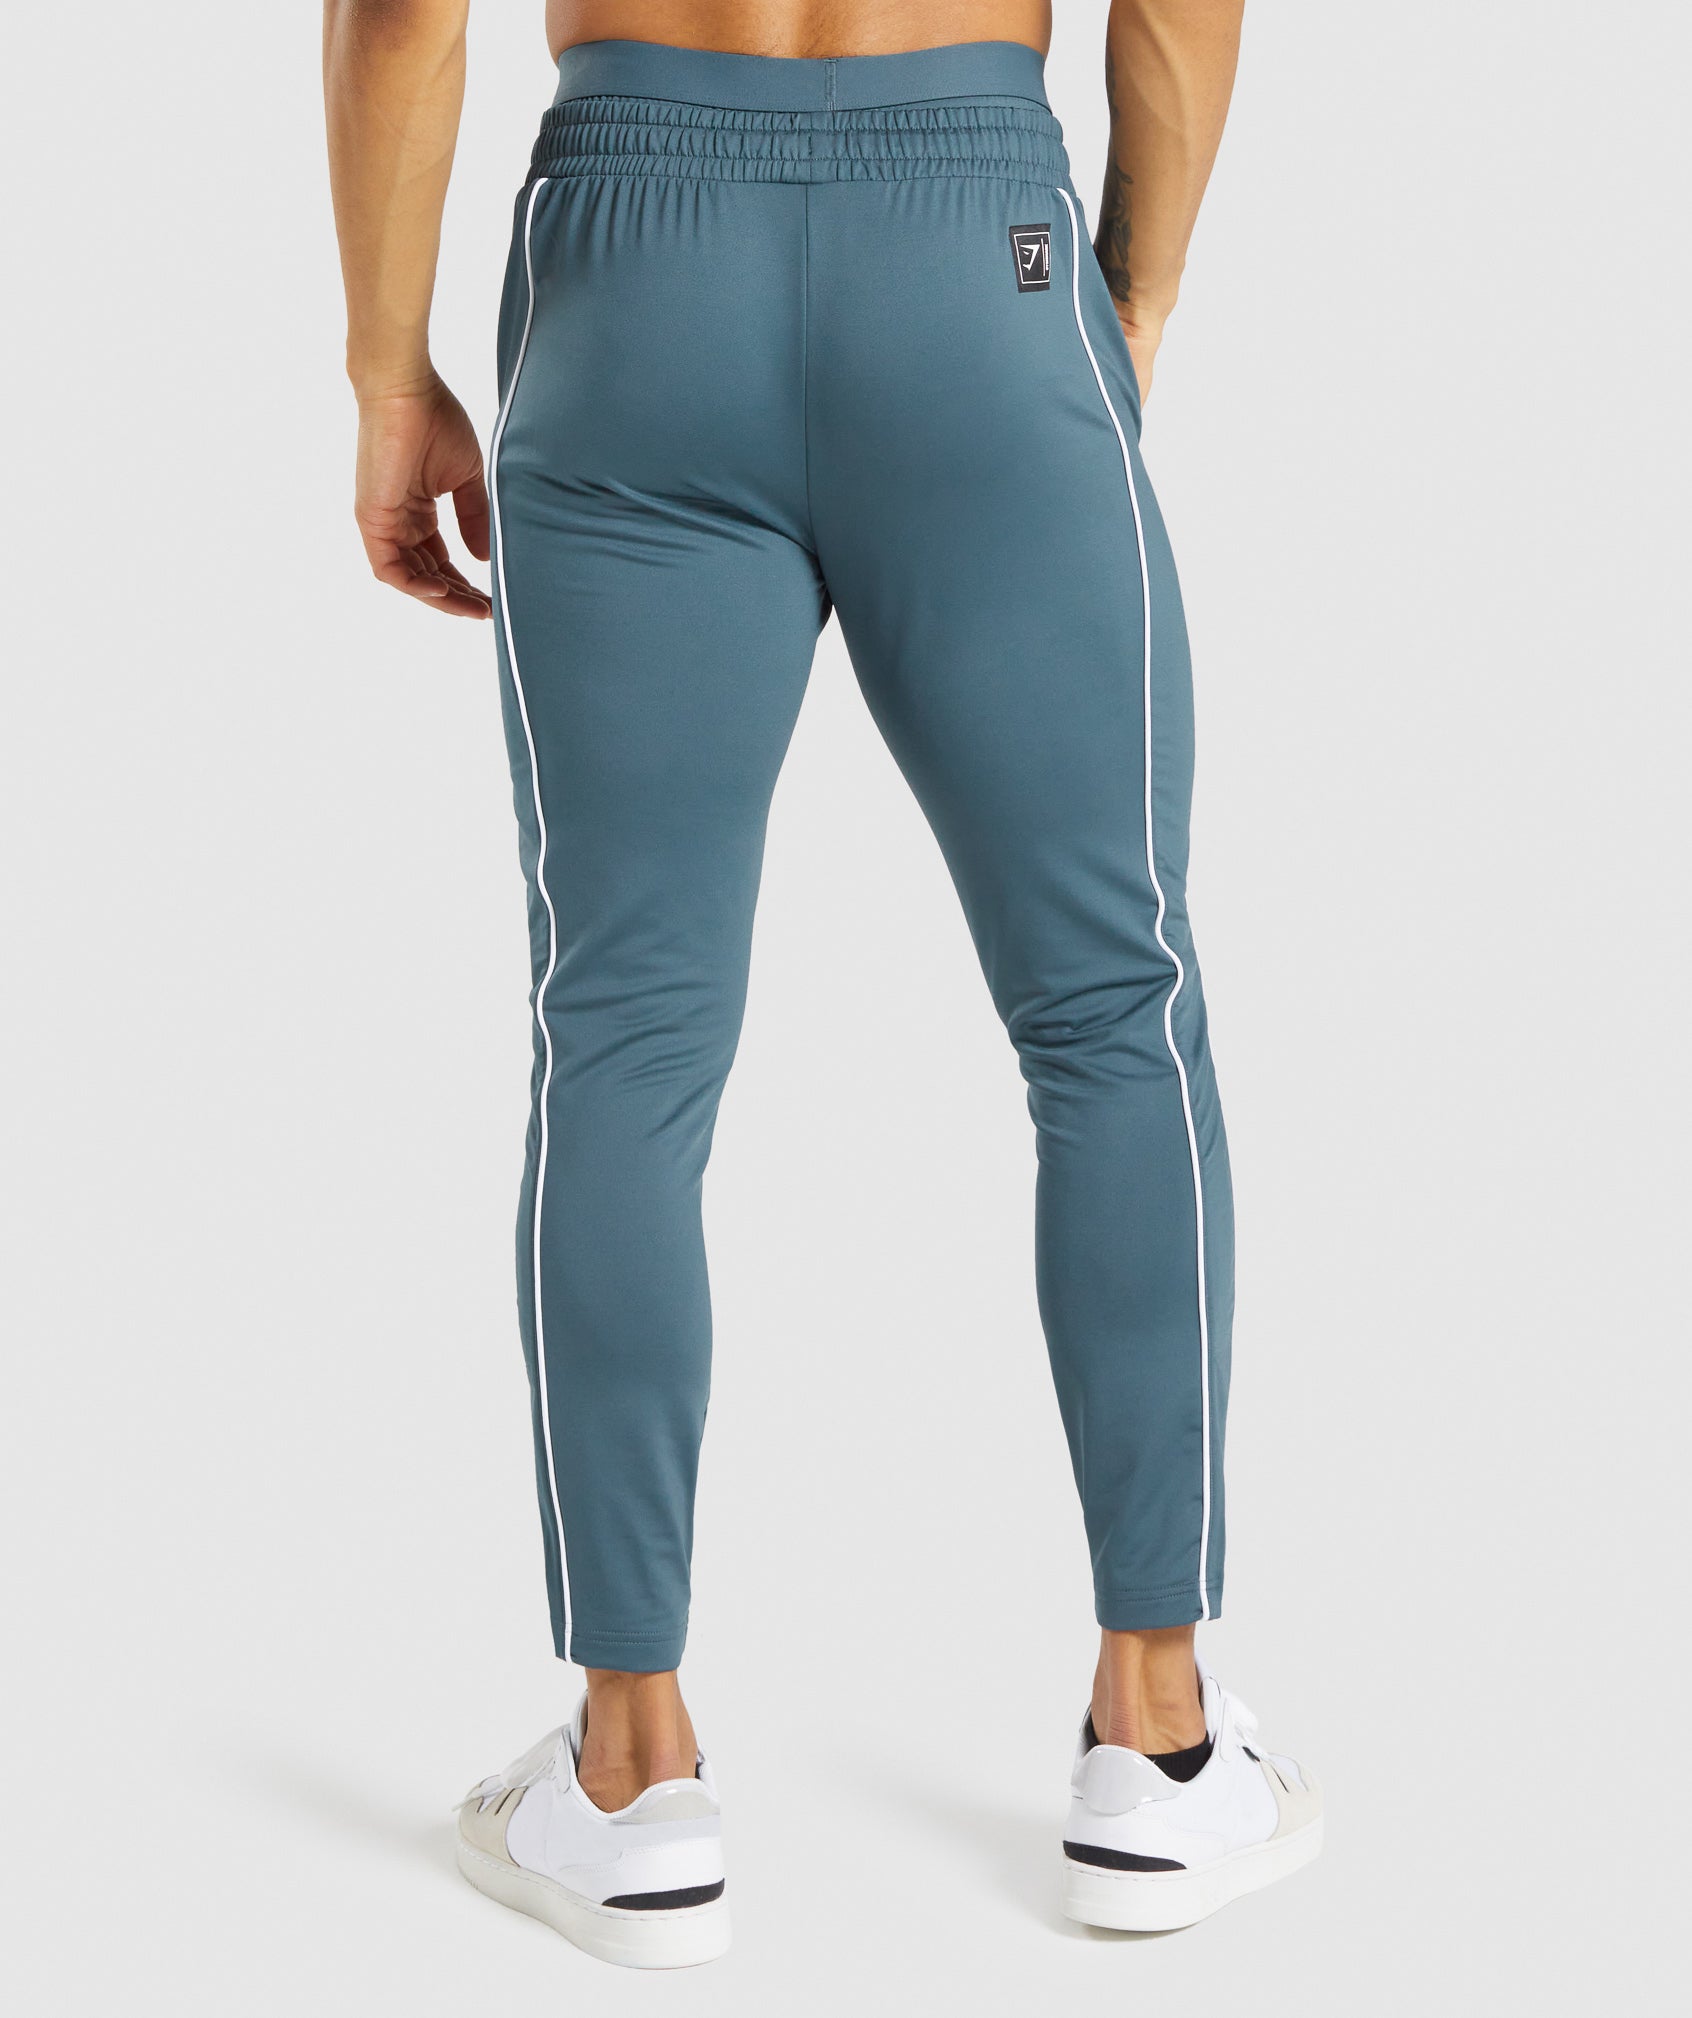 Recess Joggers in Teal - view 3